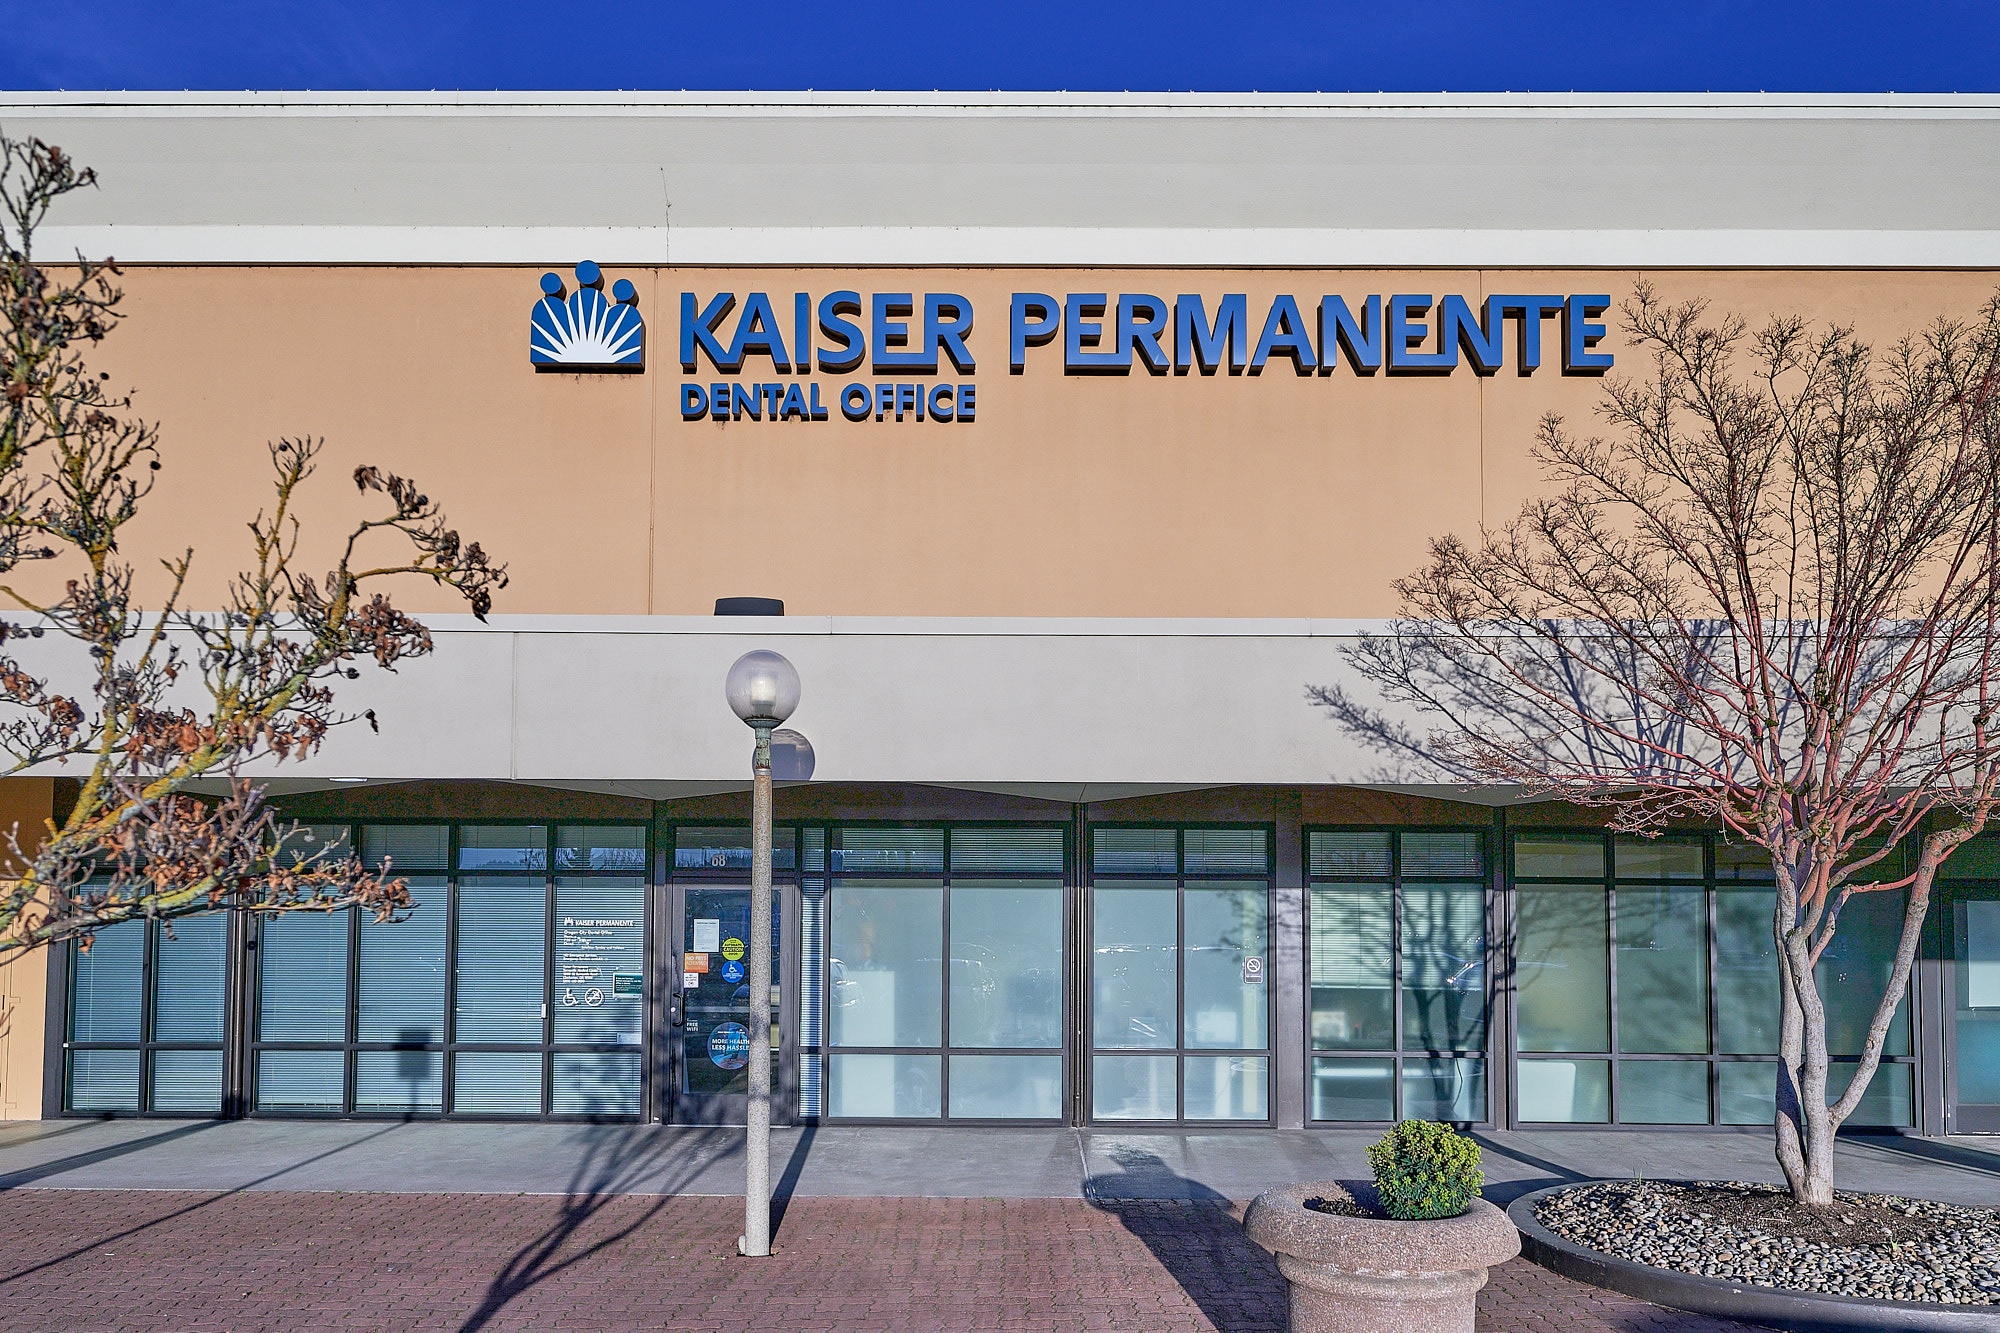 Kaiser permanente dental care baxter healthcare products